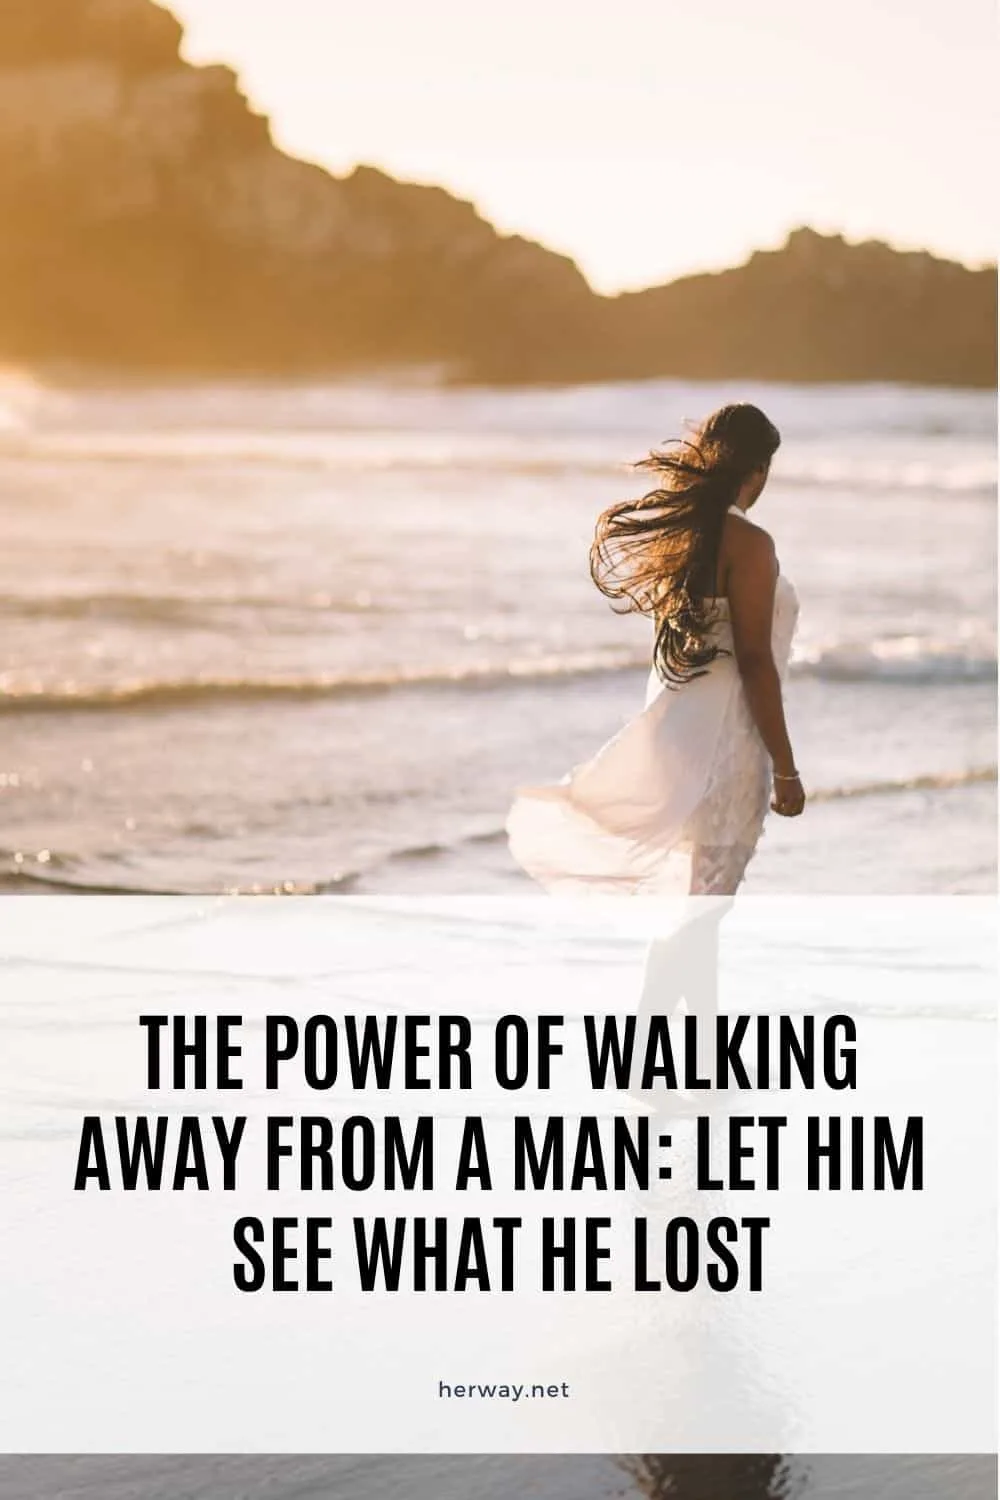 Why walking away builds attraction